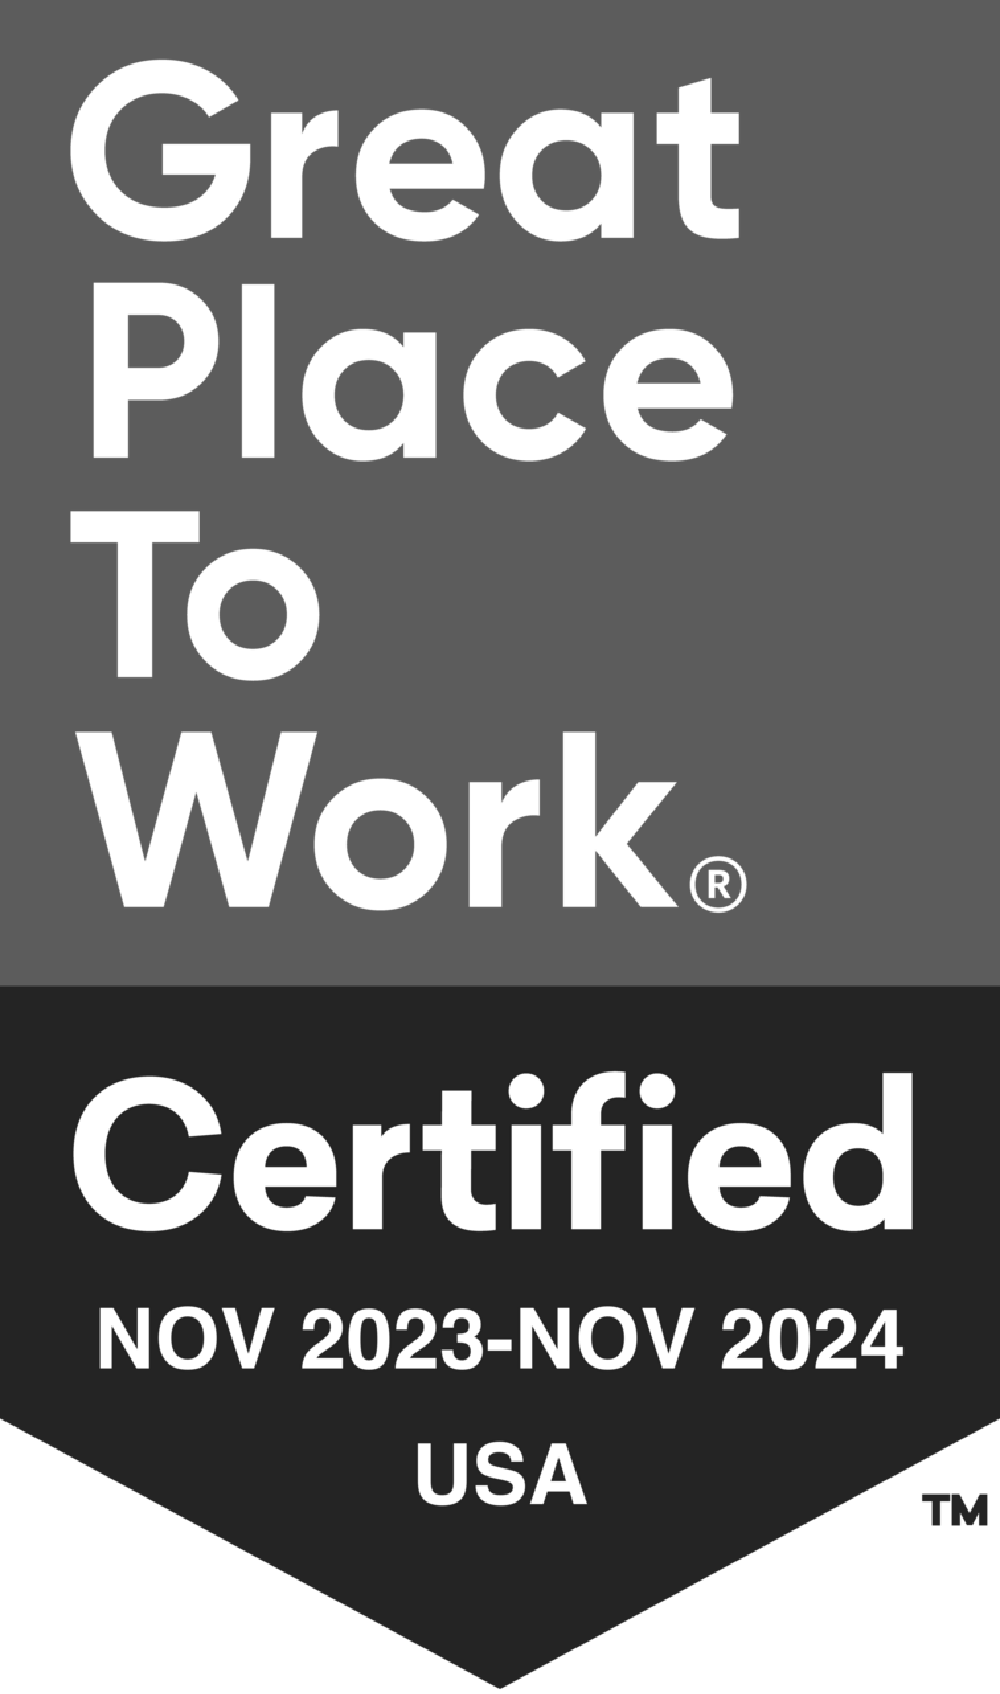 Great Place to Work Certified. November 2023 - November 2024